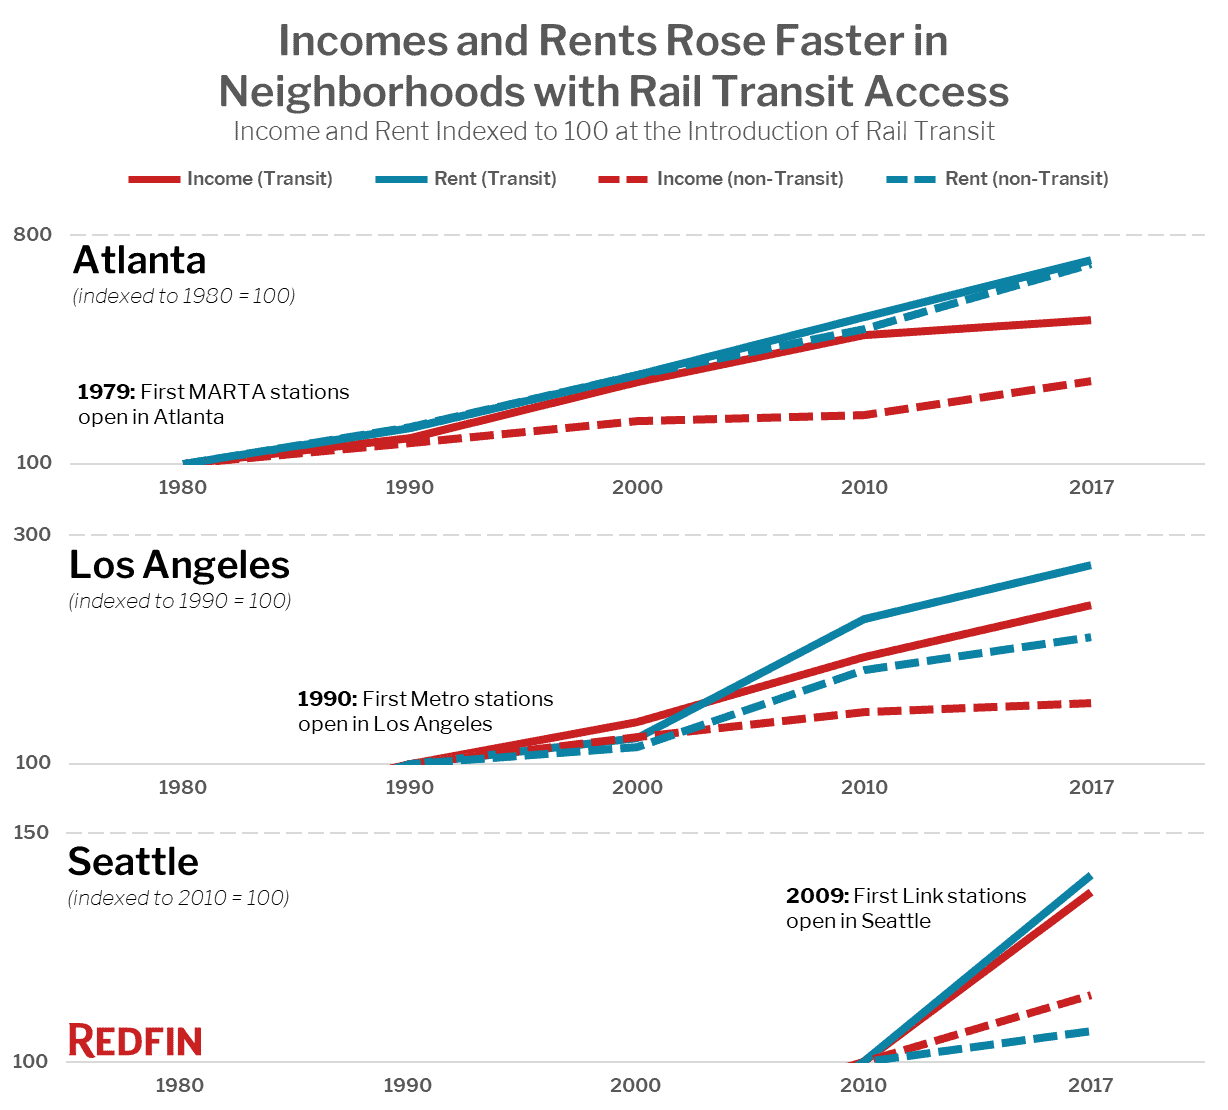 Incomes and Rents Rose Faster in Neighborhoods with Rail Transit Access